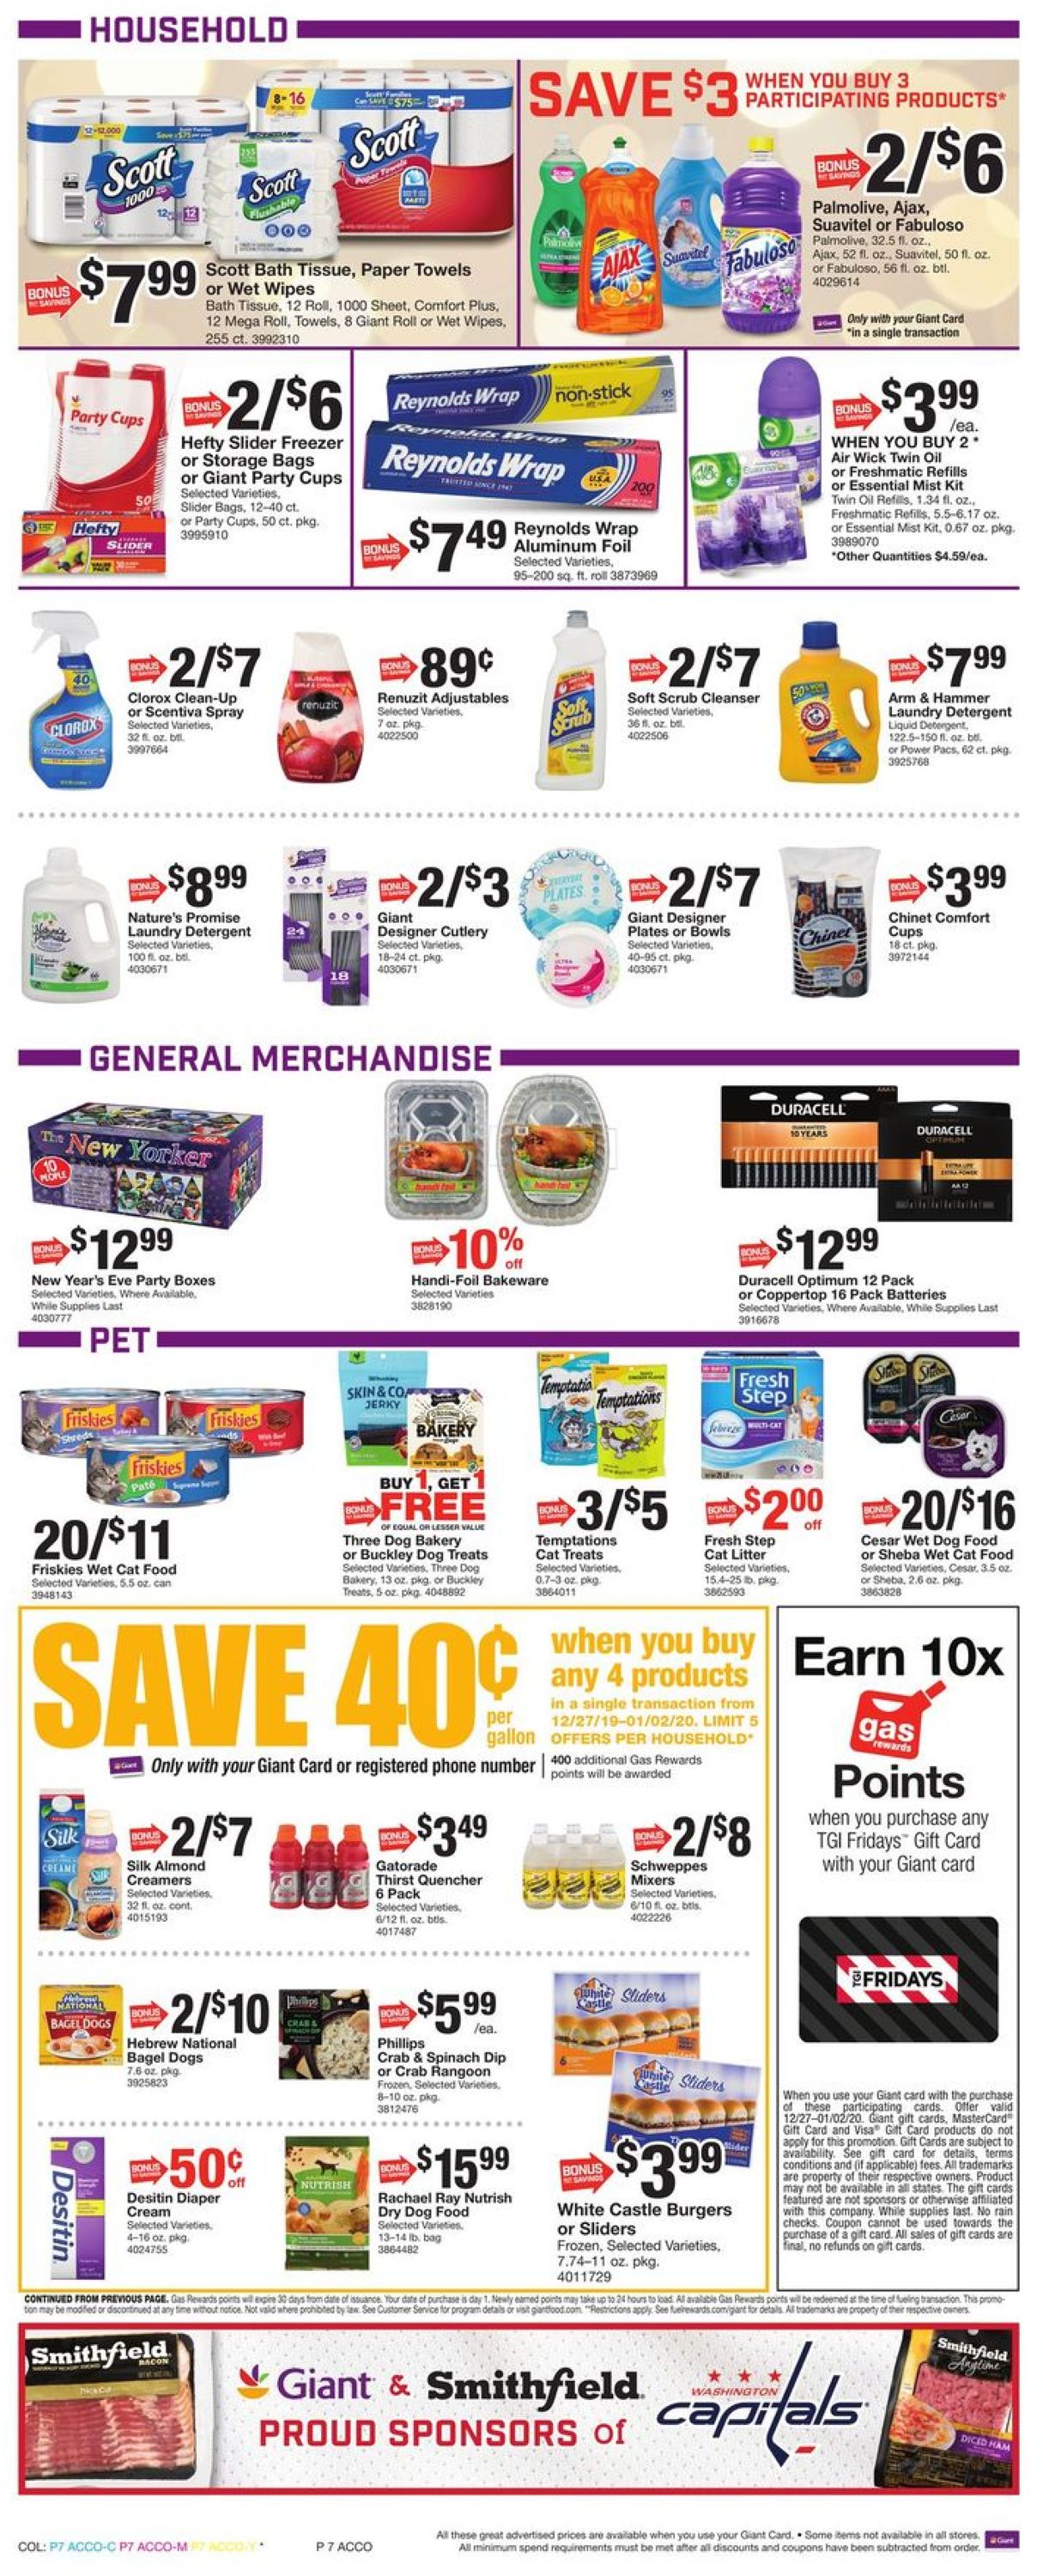 Giant Food - New Year's Ad 2019/2020 Weekly Ad Circular - valid 12/27-01/02/2020 (Page 9)